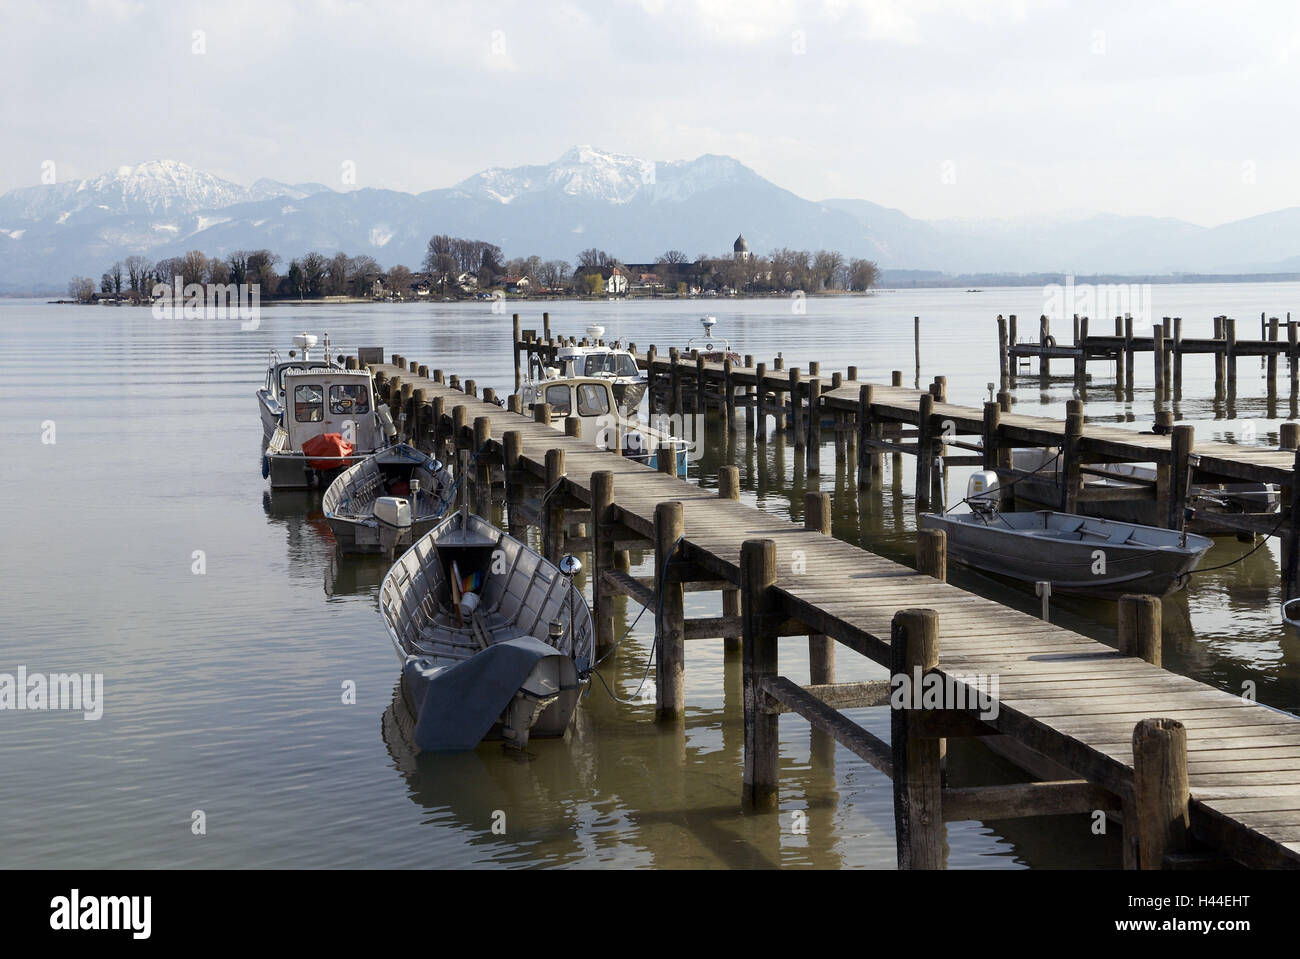 Lake Chiemsee, landing stages, boots, water, mirroring, women's island, houses, church, trees, mountains, heavens, clouds, Germany, Bavaria, Chiemgau, Stock Photo